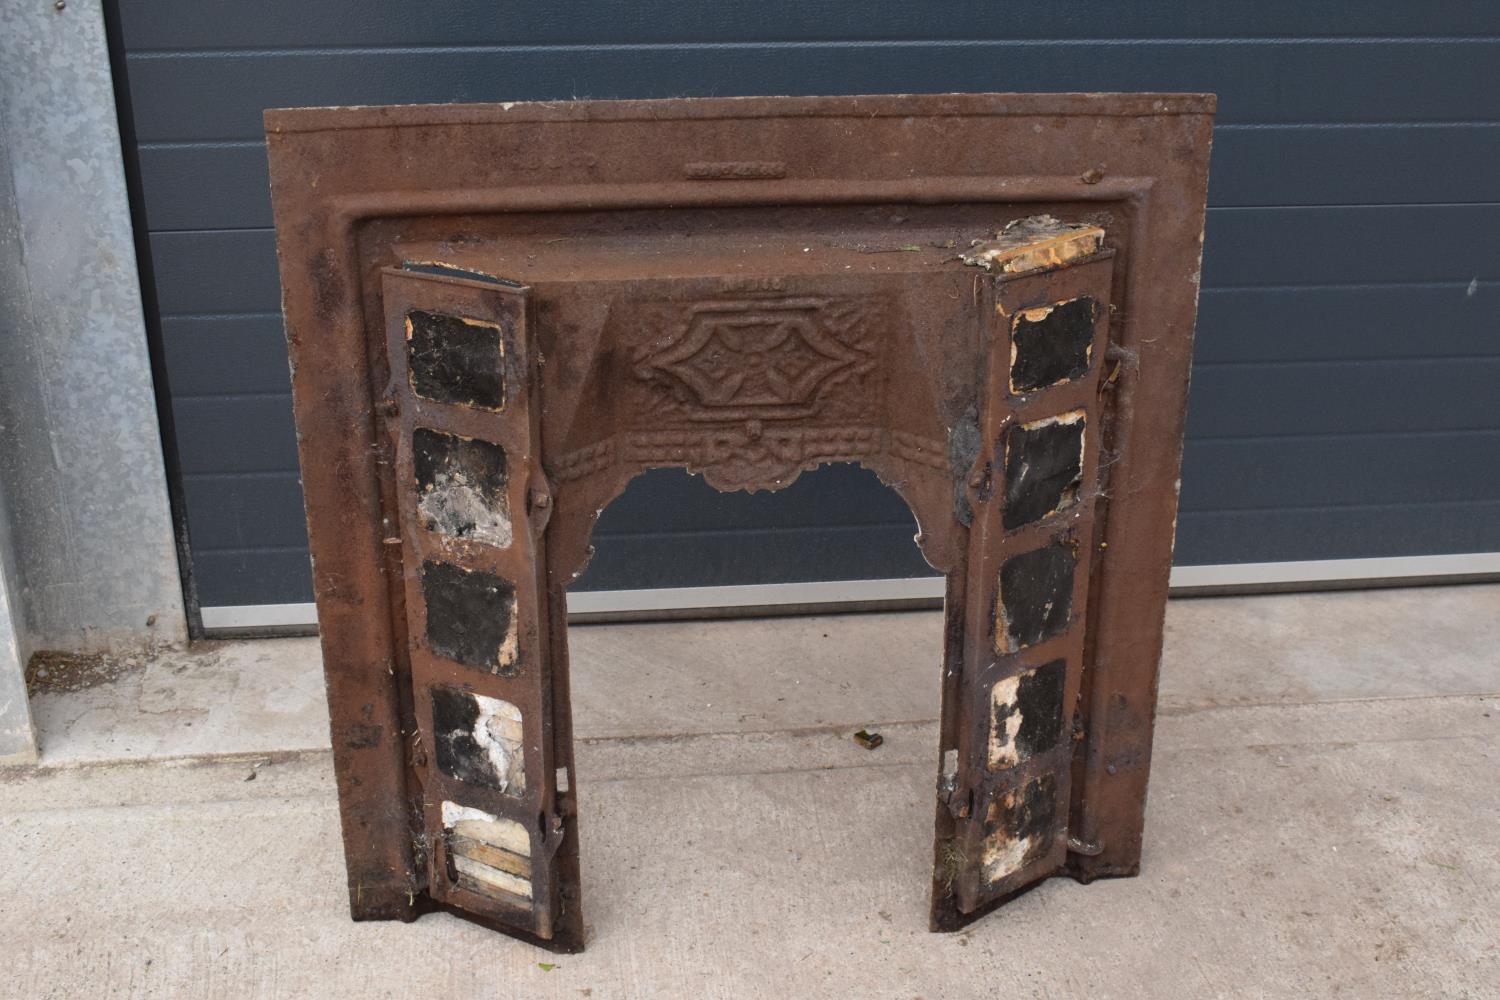 Victorian cast iron fireplace set with tiles. 96 x 14 x 97cm tall. - Image 7 of 9